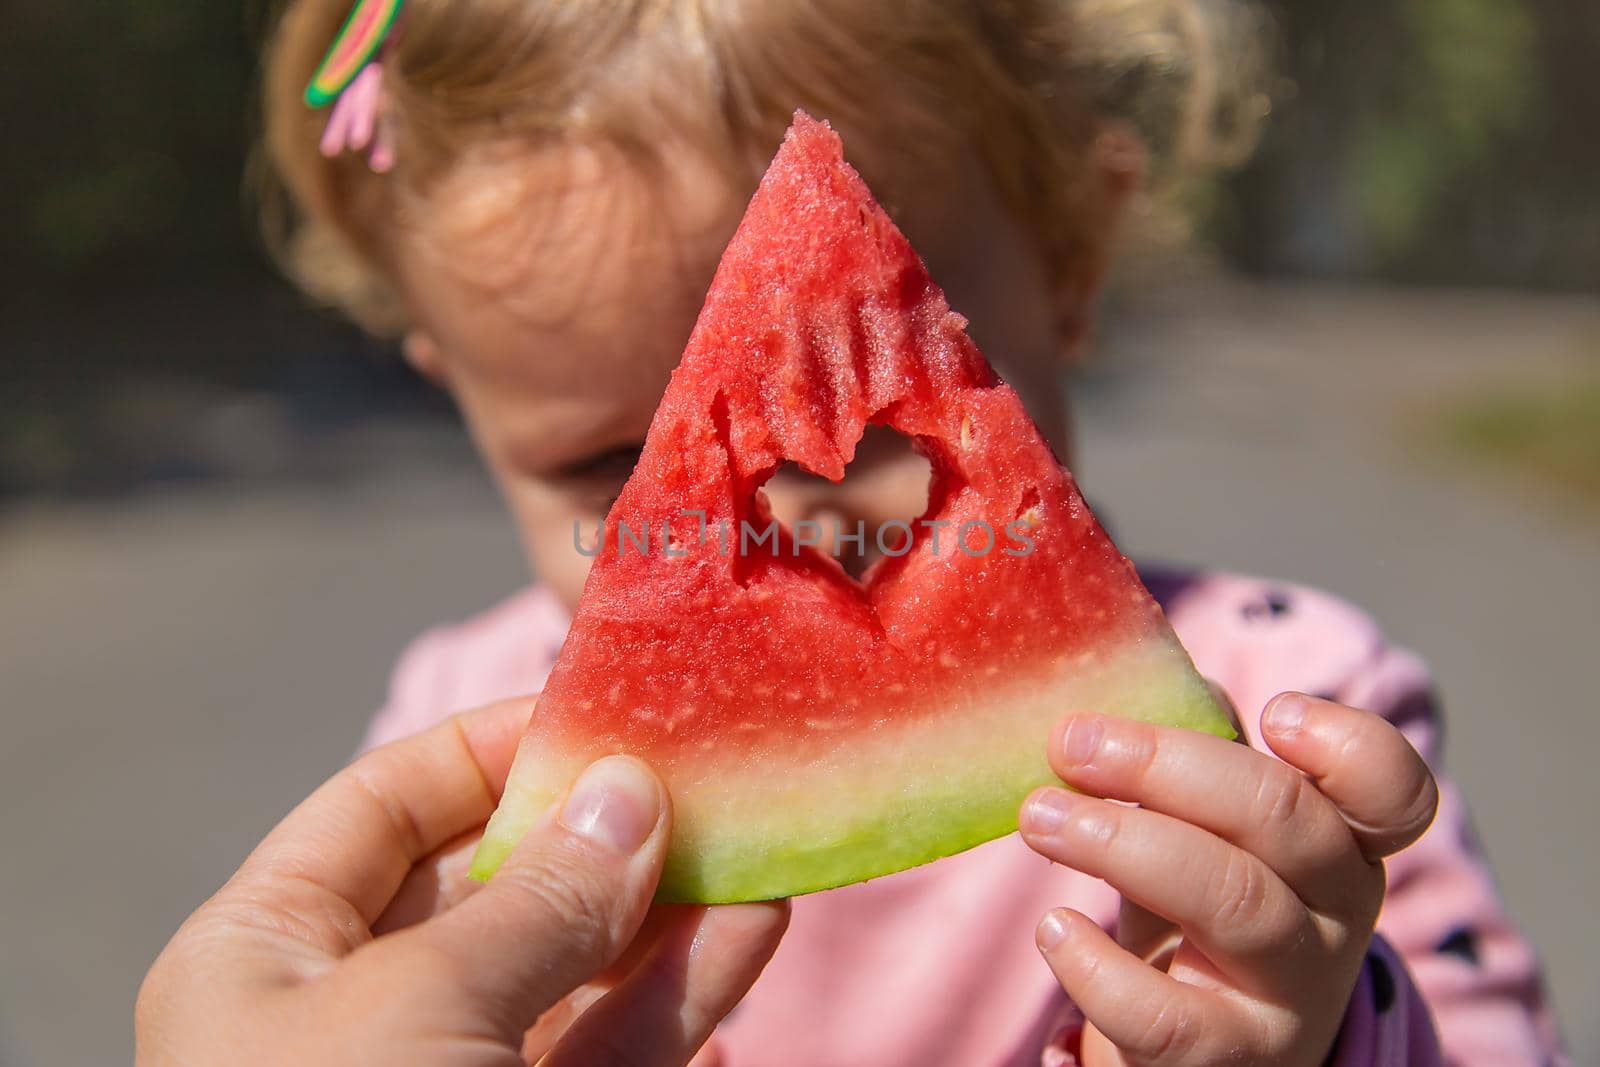 The child eats watermelon in summer. Selective focus. Kid.